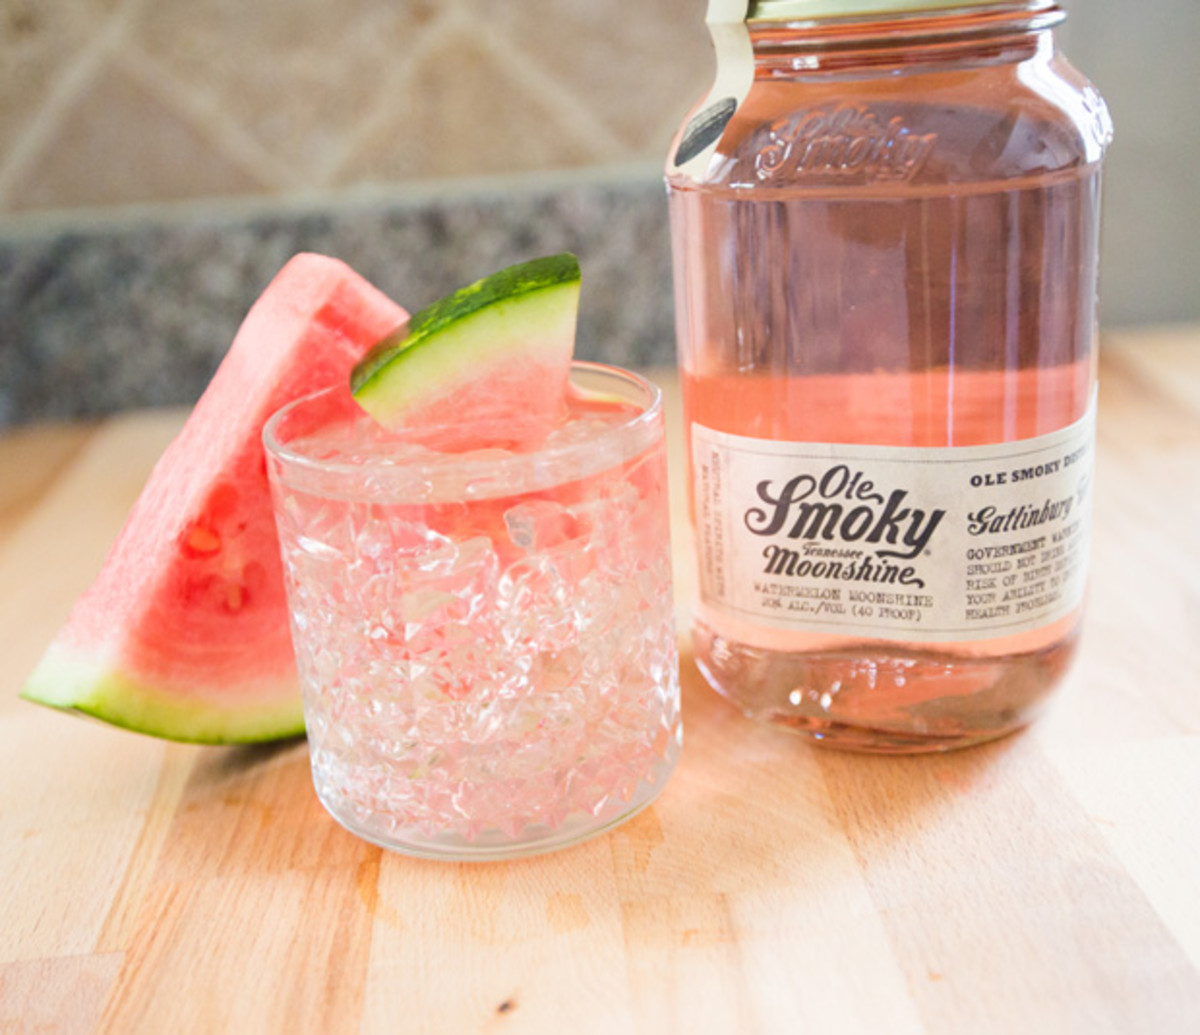 Click the link for the recipe for watermelon moonshine as well as additional big-batch moonshine cocktail recipes.